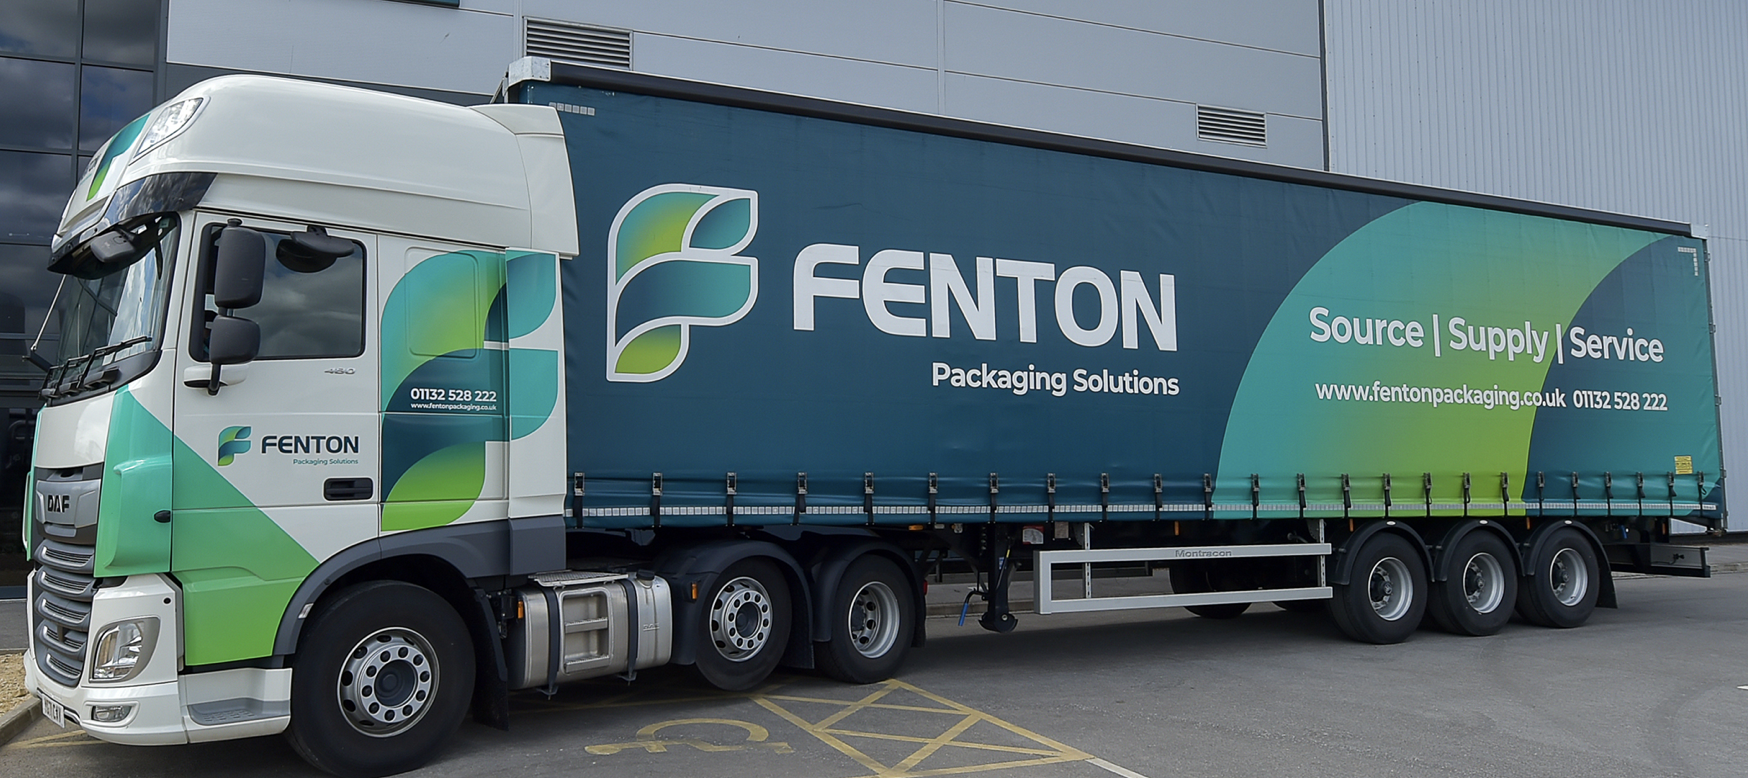 Fenton Packaging Solutions invests £1 million in relocation and rebranding